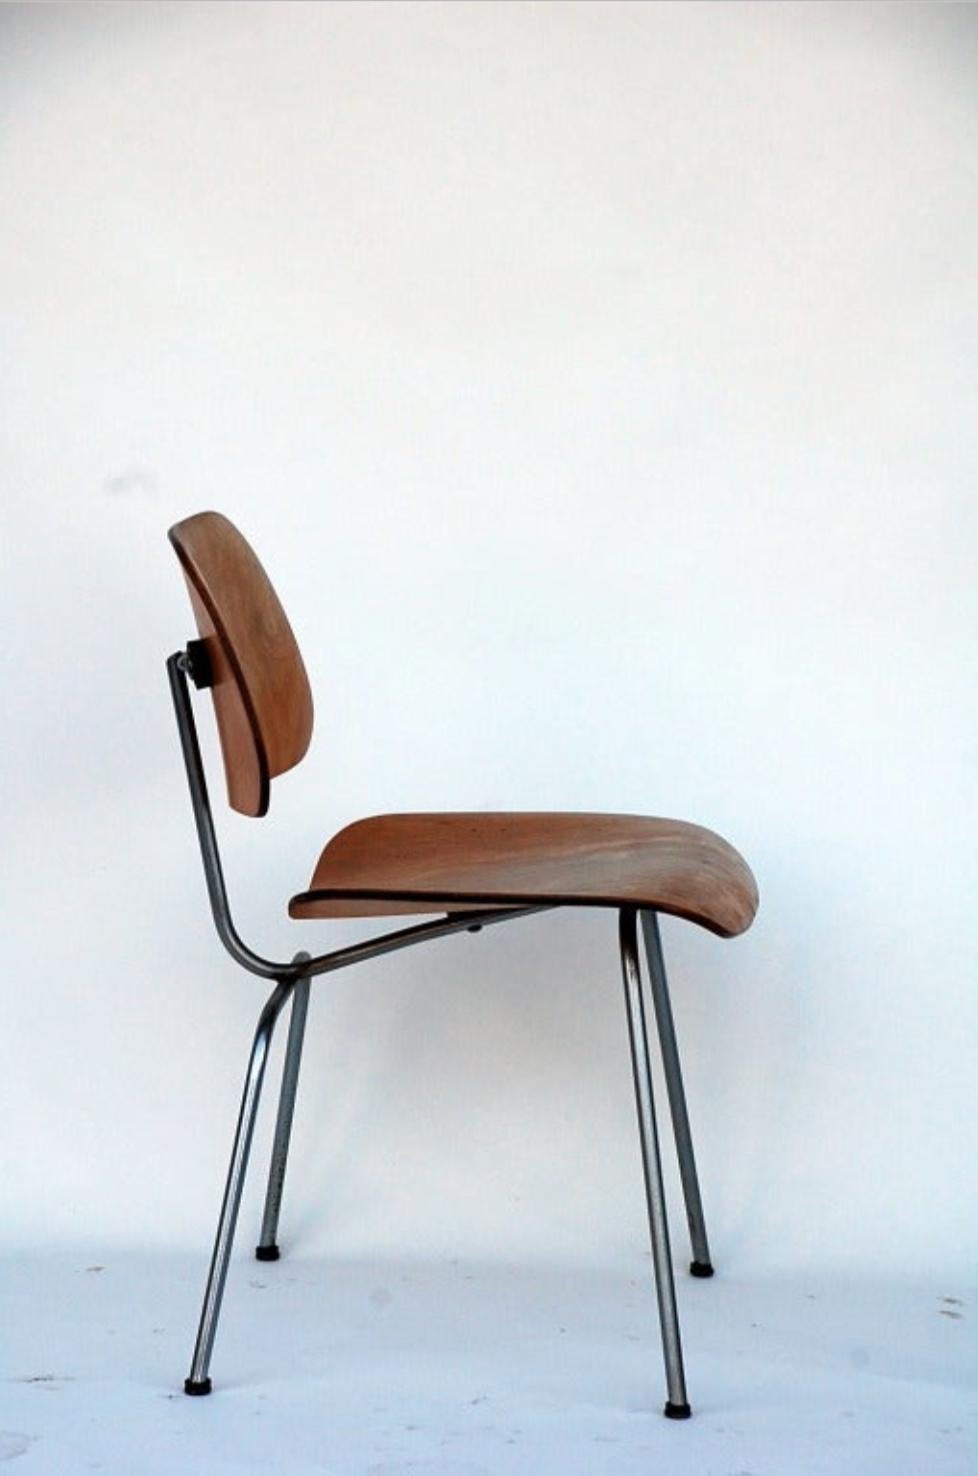 Mid-20th Century Collector's Early Eames DCM Chair For Sale